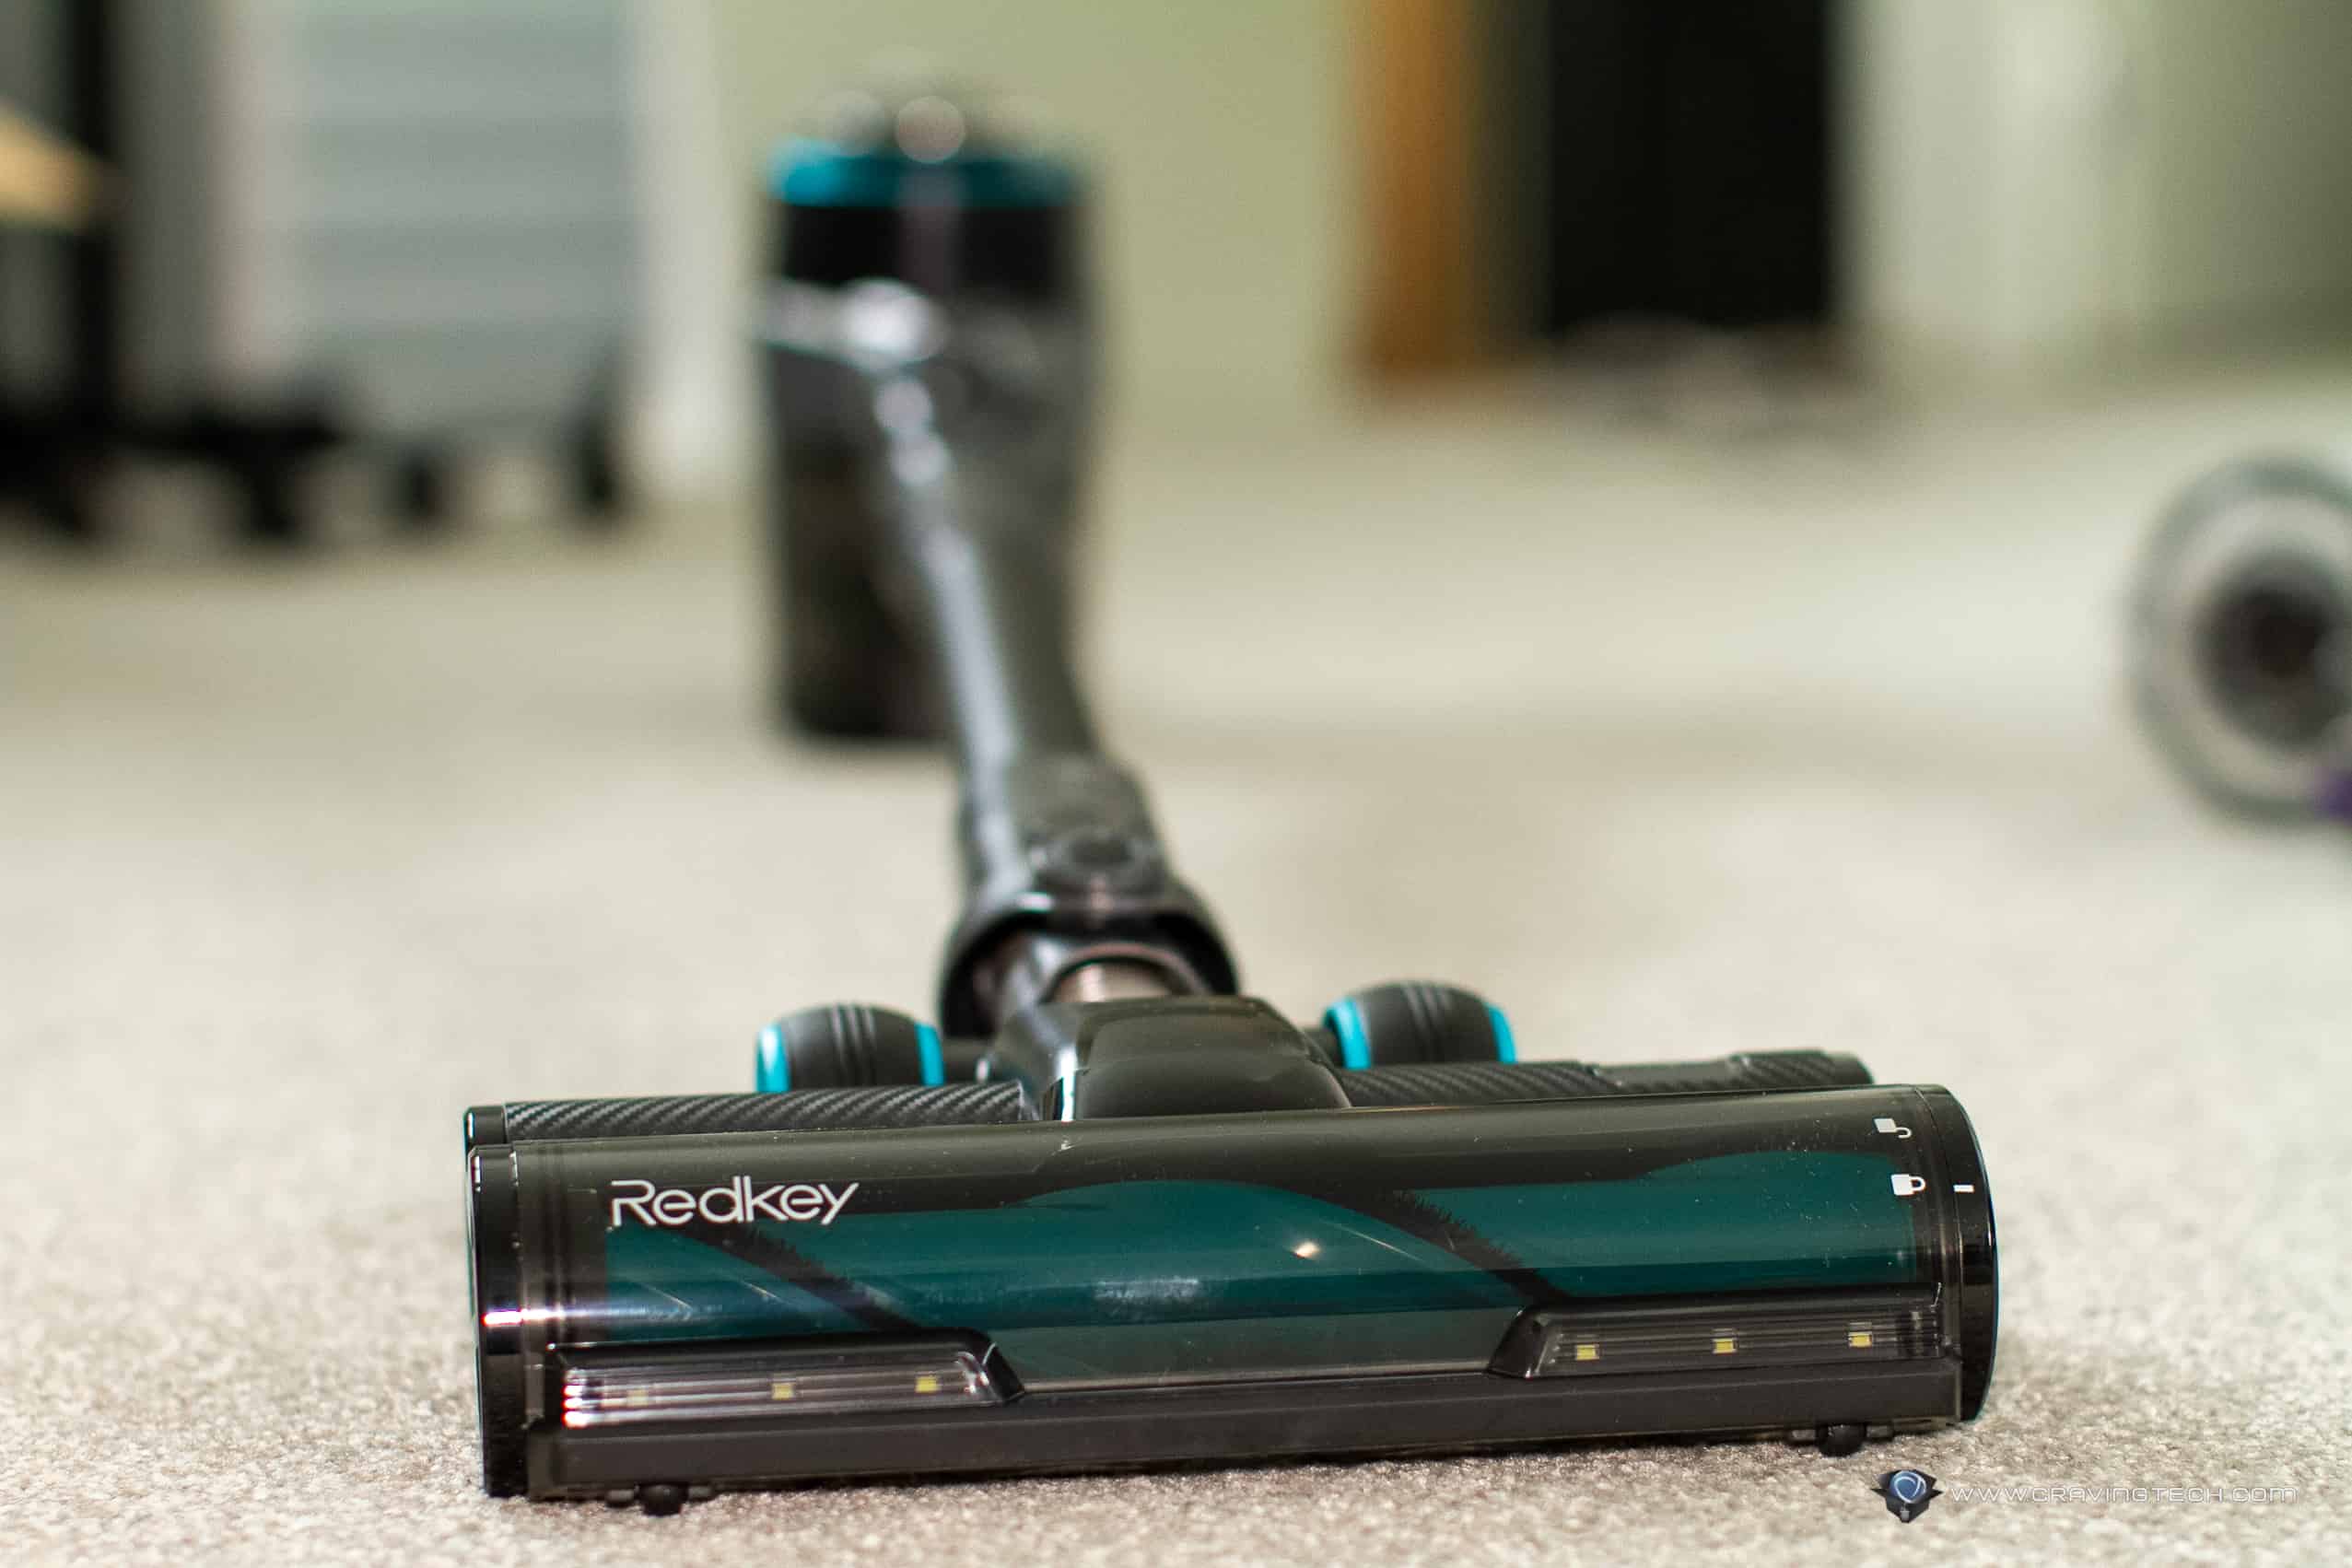 This cordless vacuum cleaner has a unique, foldable design – Redkey F10 Review